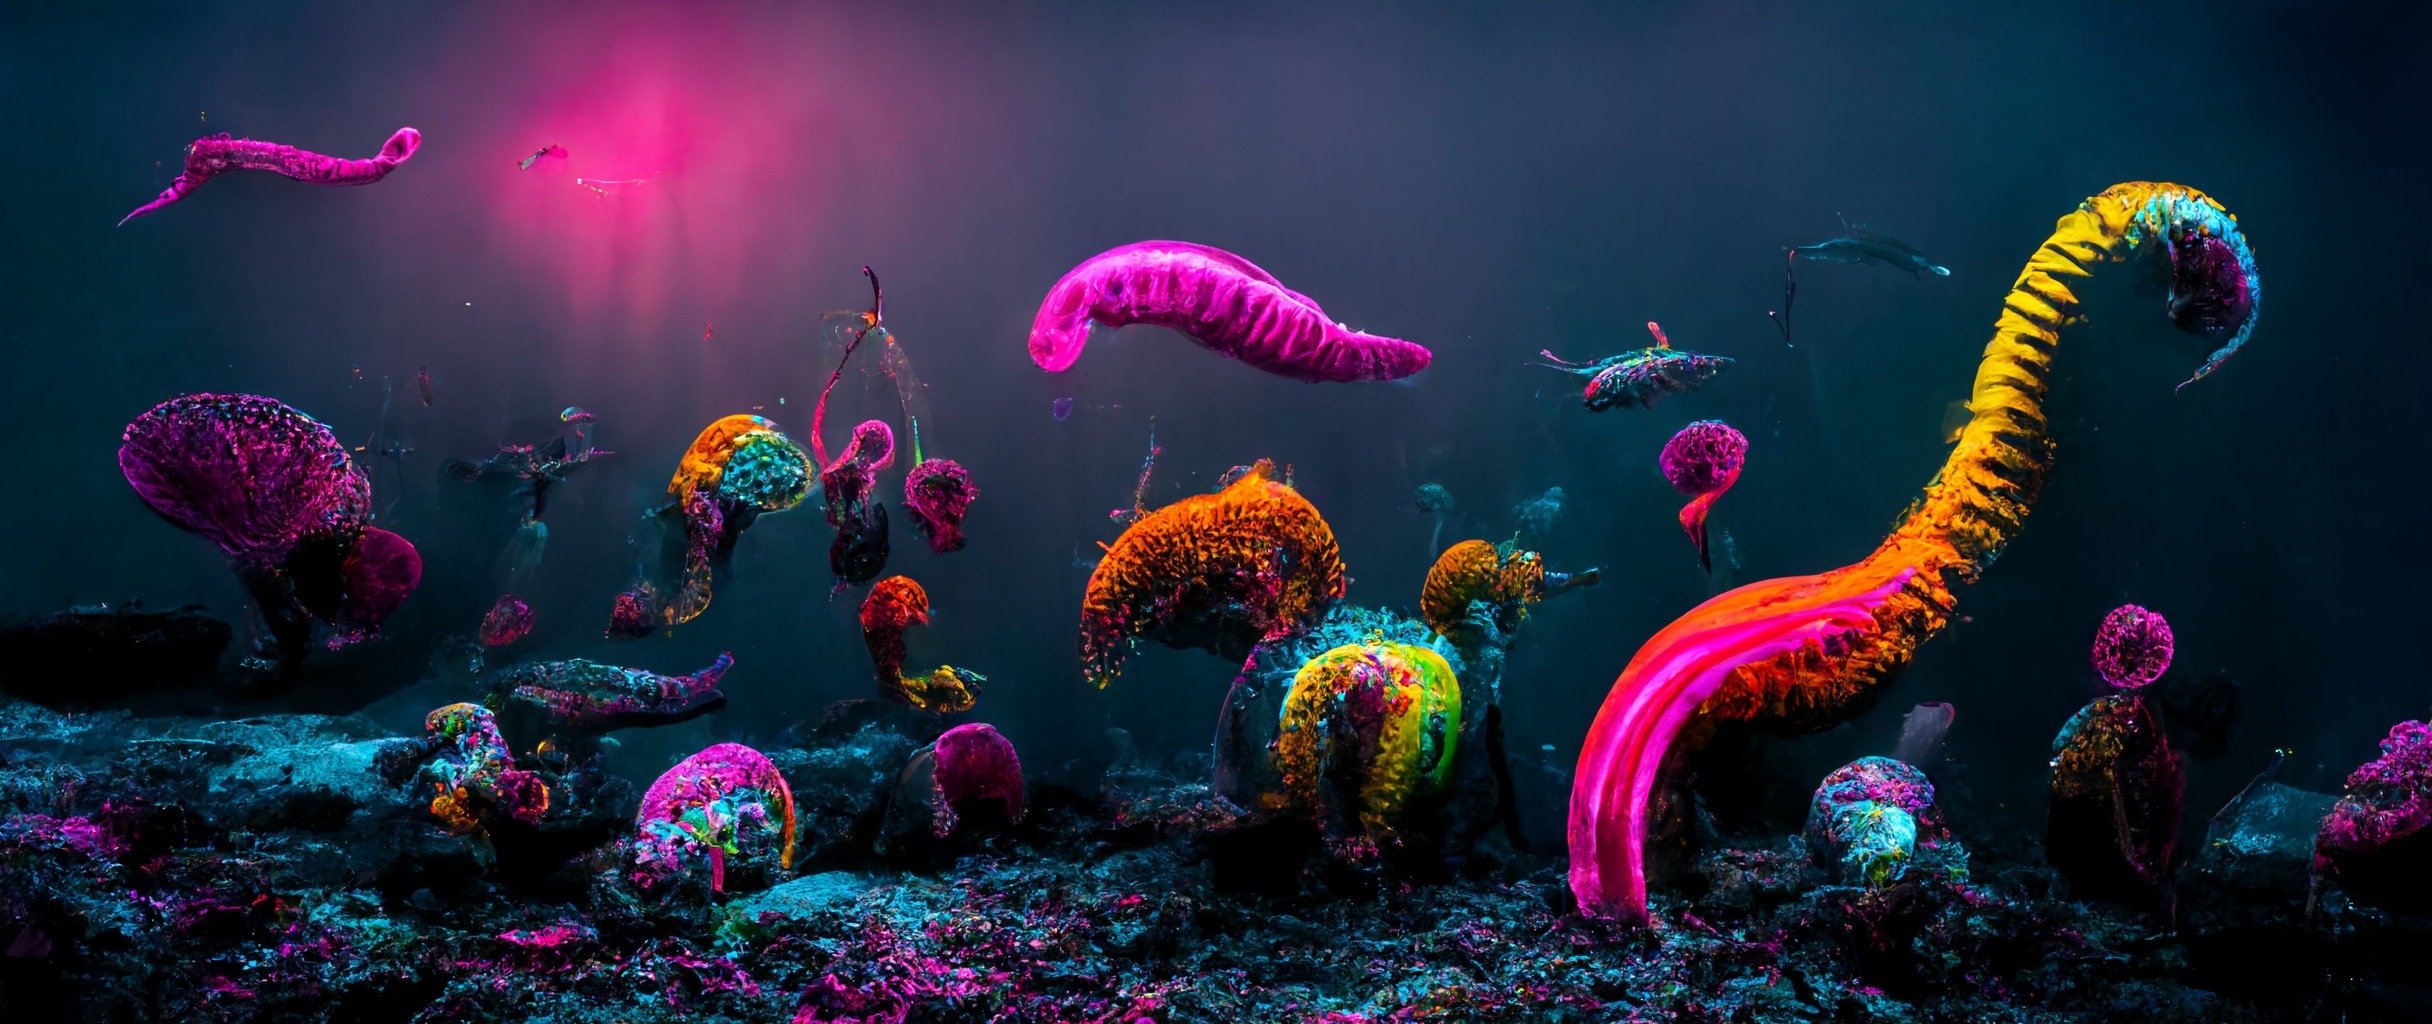 98371ed6-8433-45b0-ab7f-8f796cef7852_S3RAPH_httpss.mj.rungsLi8o__lots_of_colorful_sea_life._Underwater_majestic_choral_reef_with_dramatic_fish_p.JPG